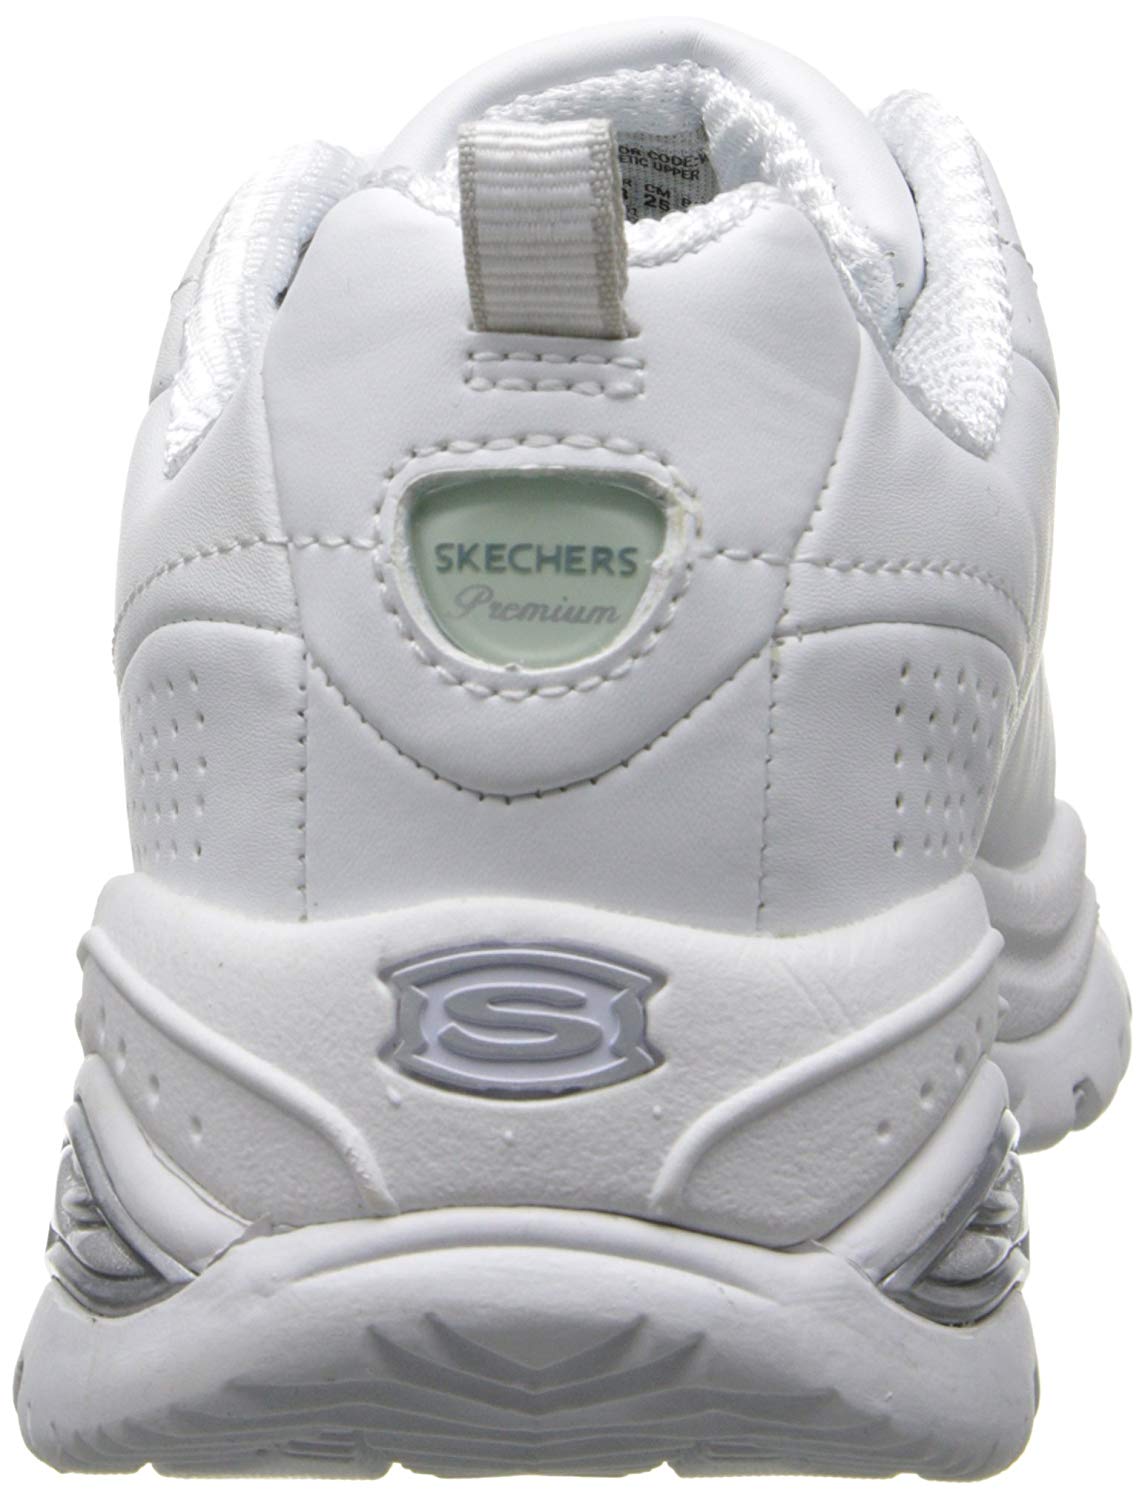 Skechers Womens 1728wnv Low Top Lace Up Walking Shoes, White, Size 10.0 ...